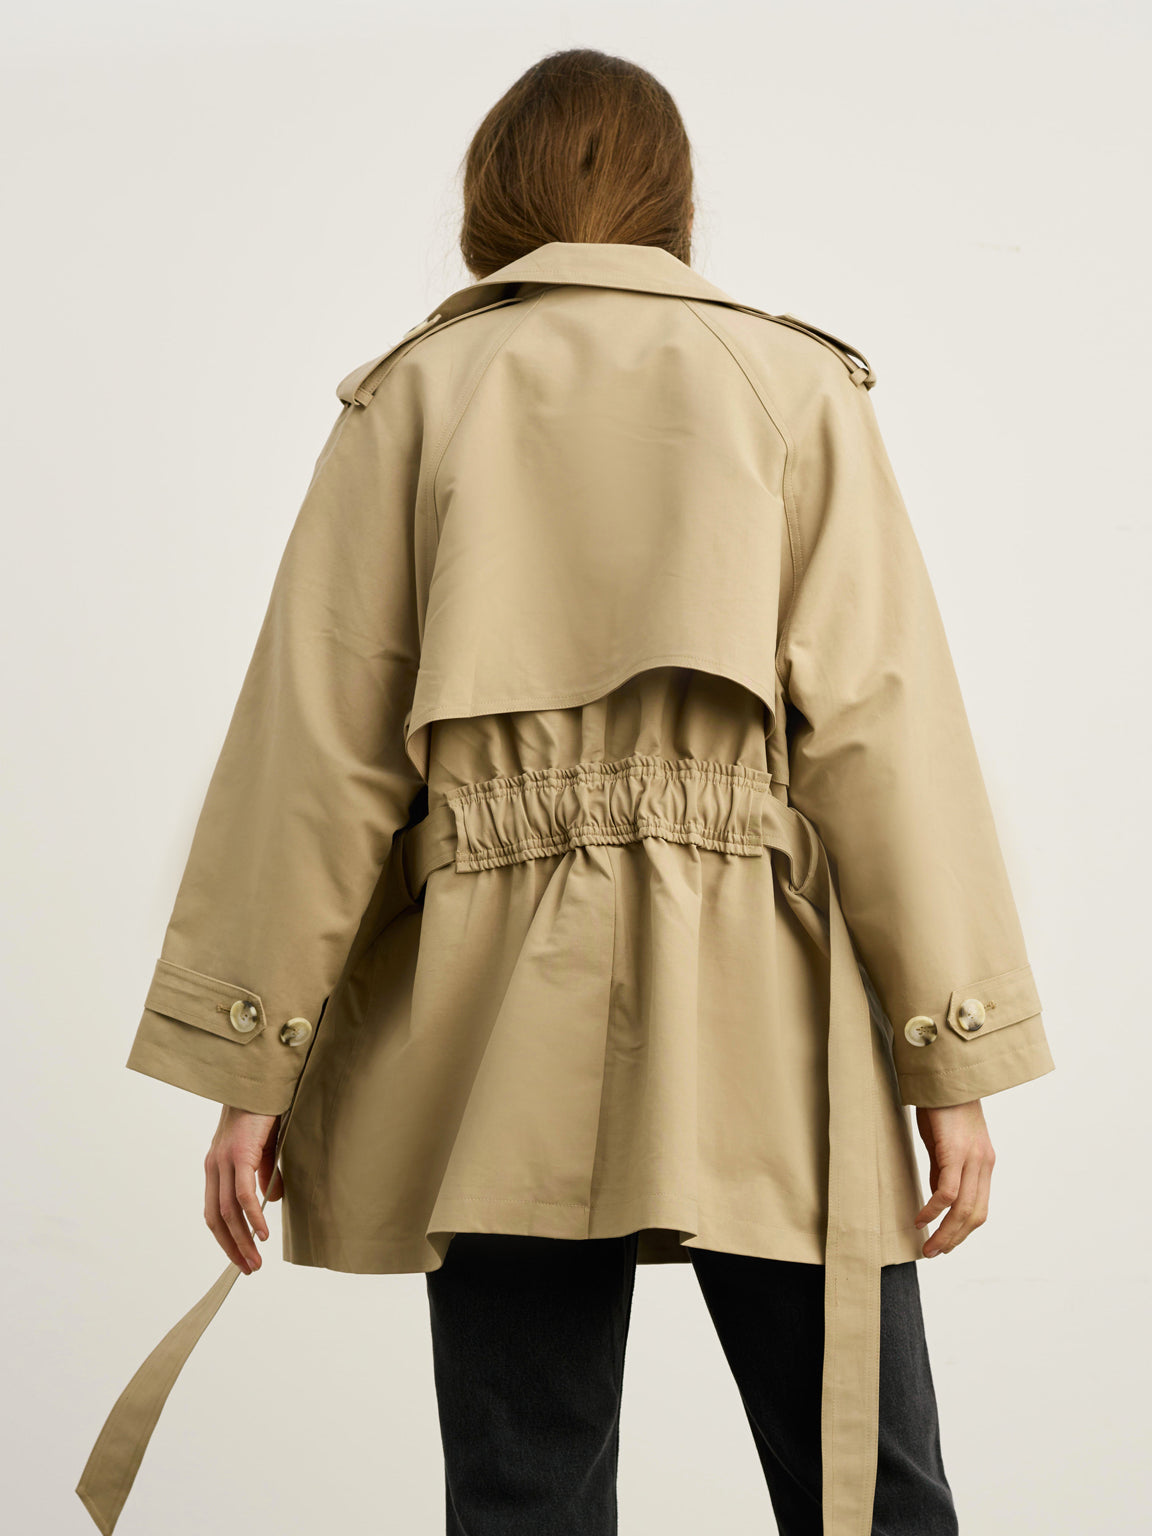 Meotine Cassandra Trench Jacket in Beige from The New Trend